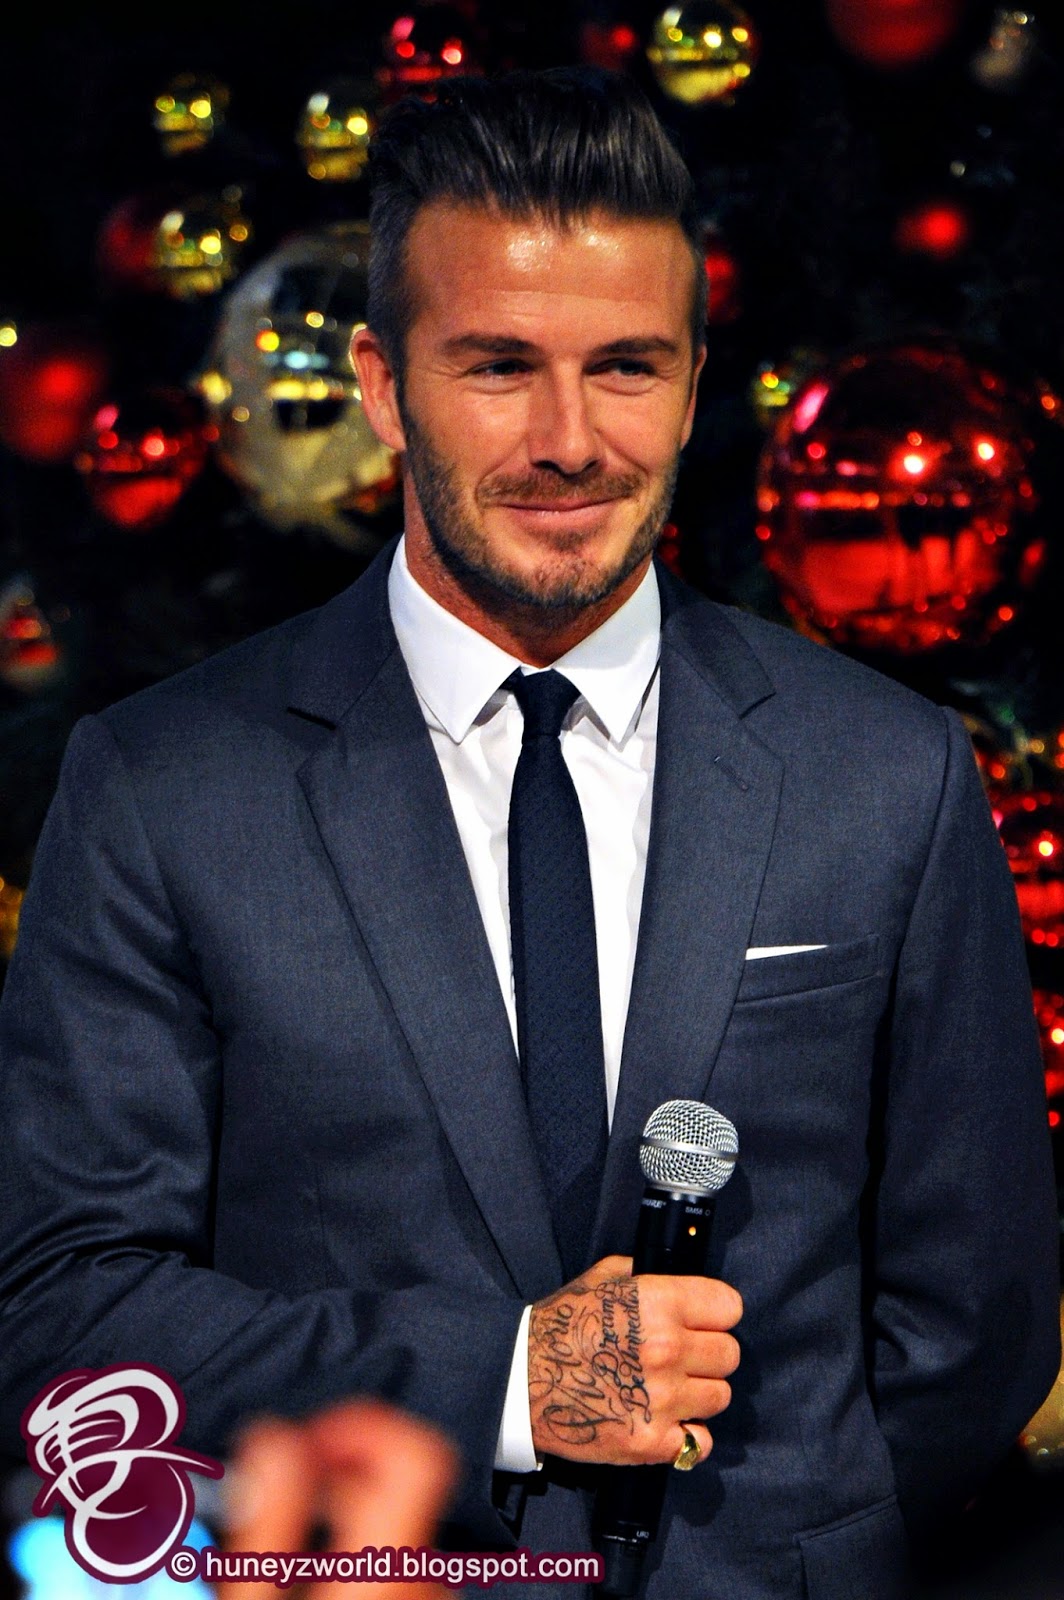 David Beckham In Singapore Marina Bay Sands To Usher In The Festive ...